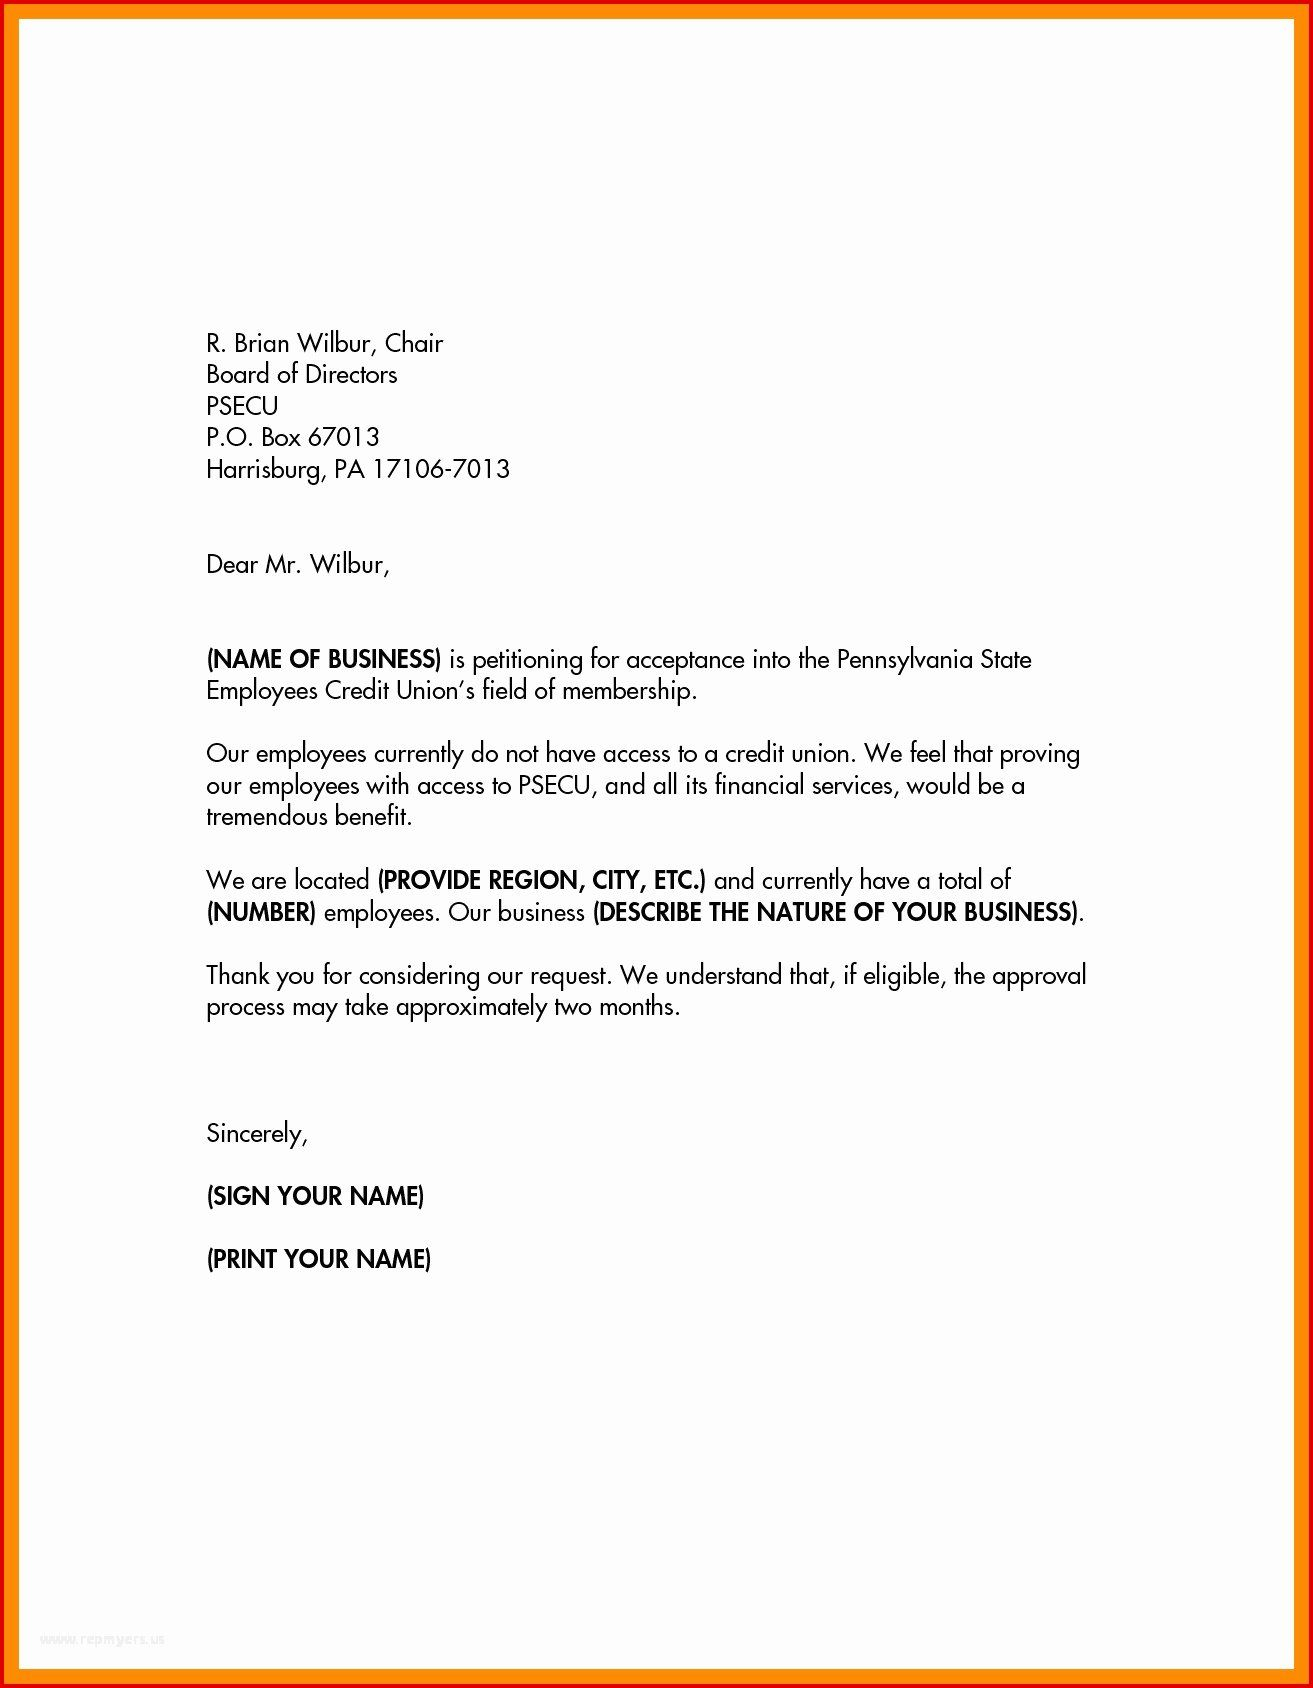 30 Niw Recommendation Letter Sample In 2020 Letter Of within proportions 1313 X 1688